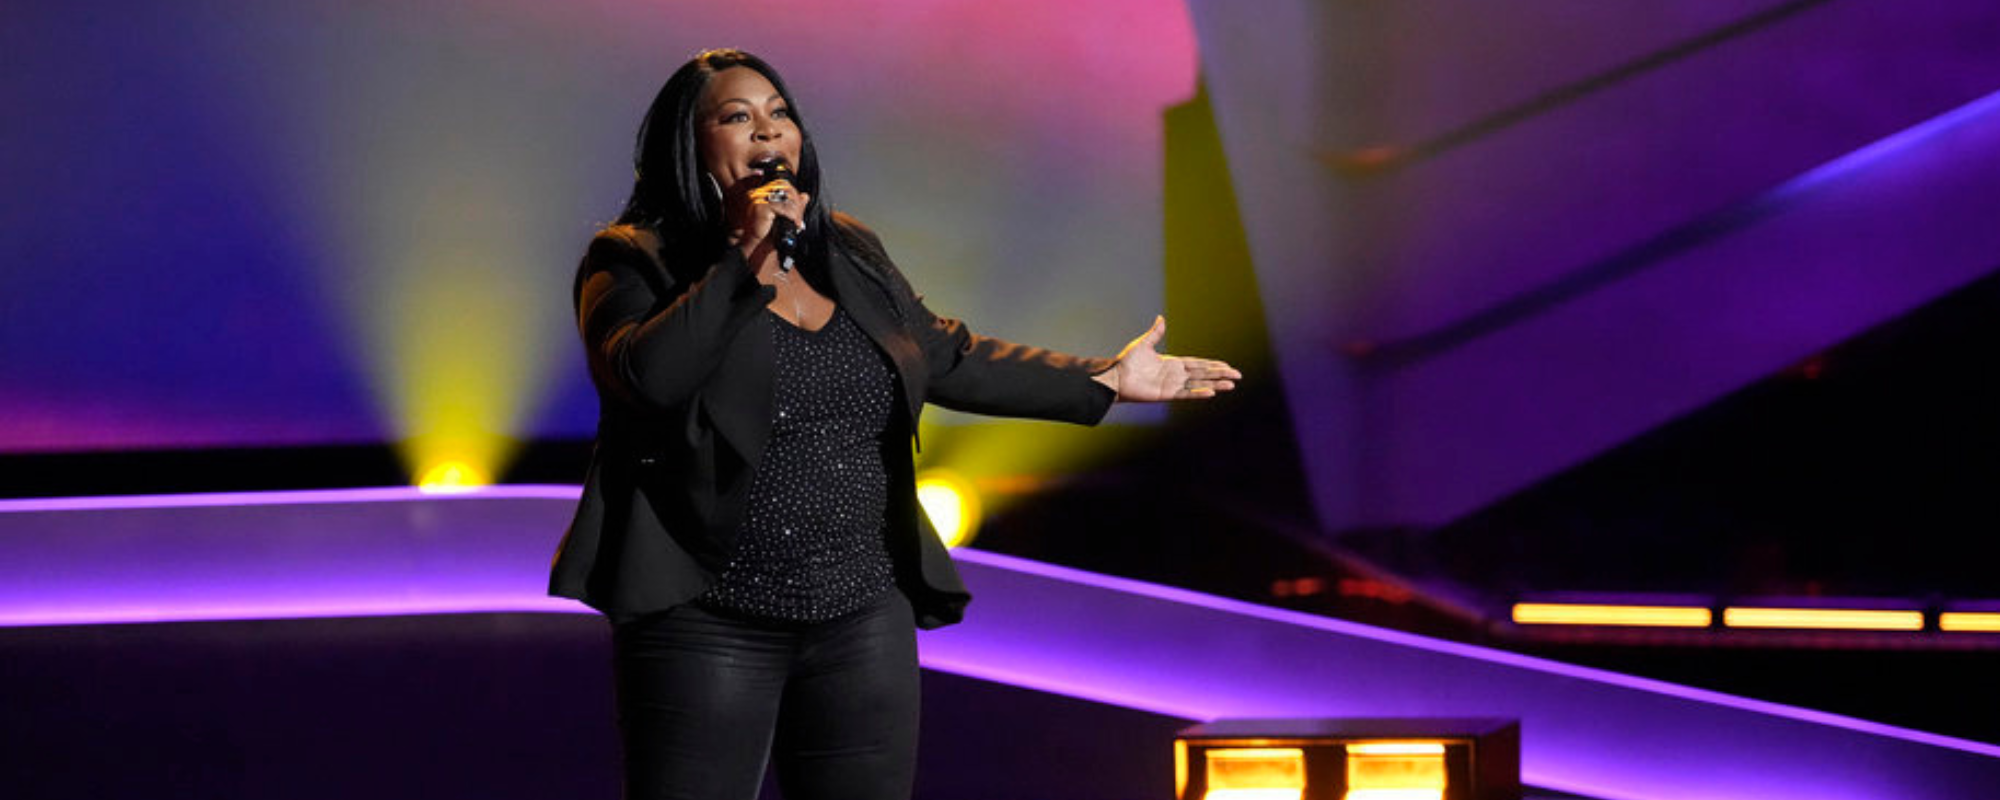 Former Backup Singer Ms. Monét Owns ‘The Voice’ Stage with Powerful Steve Winwood Cover